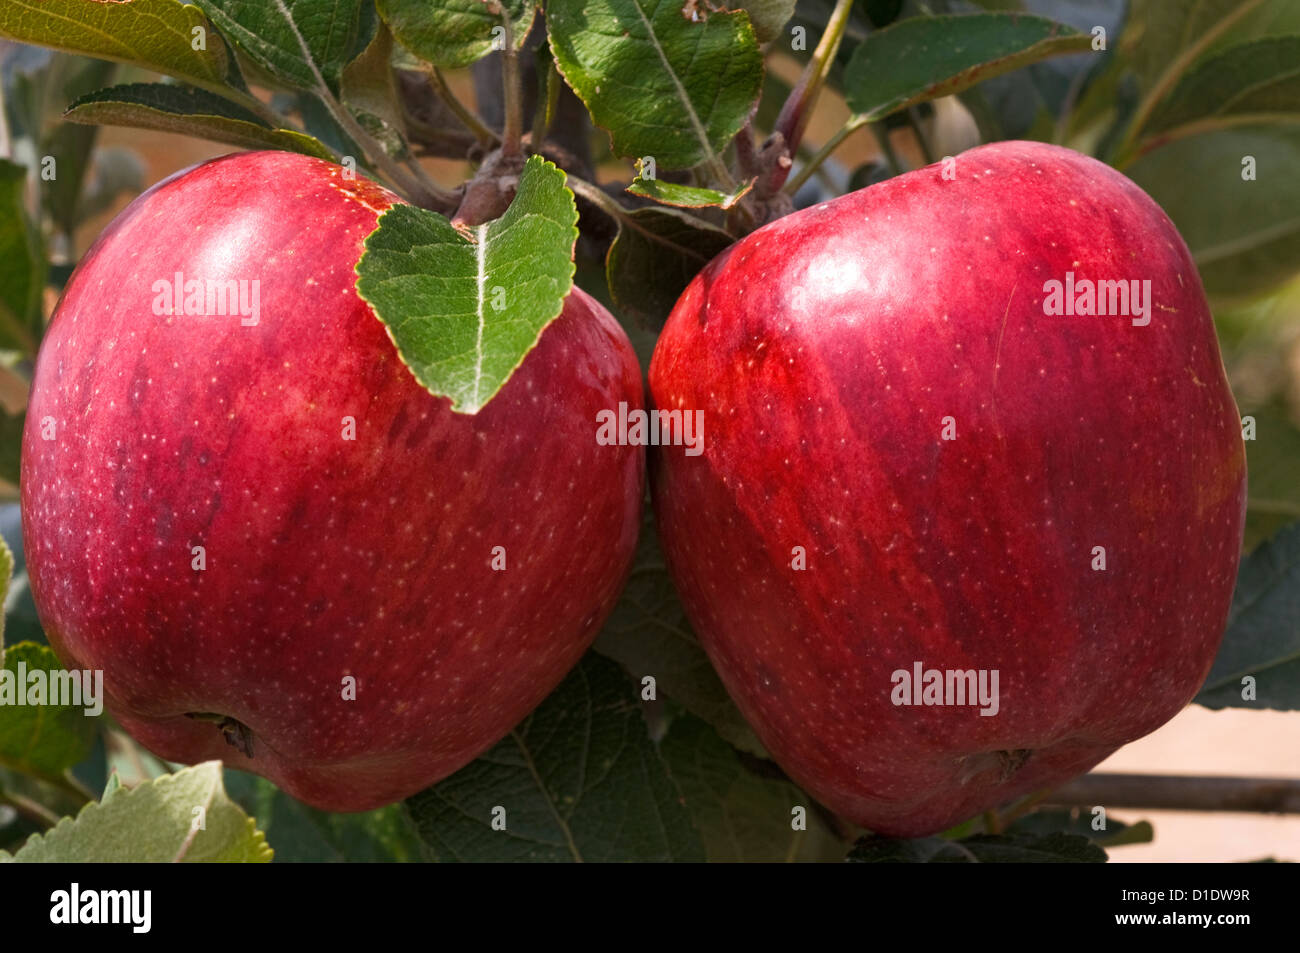 Two red apples on the tree Stock Photo